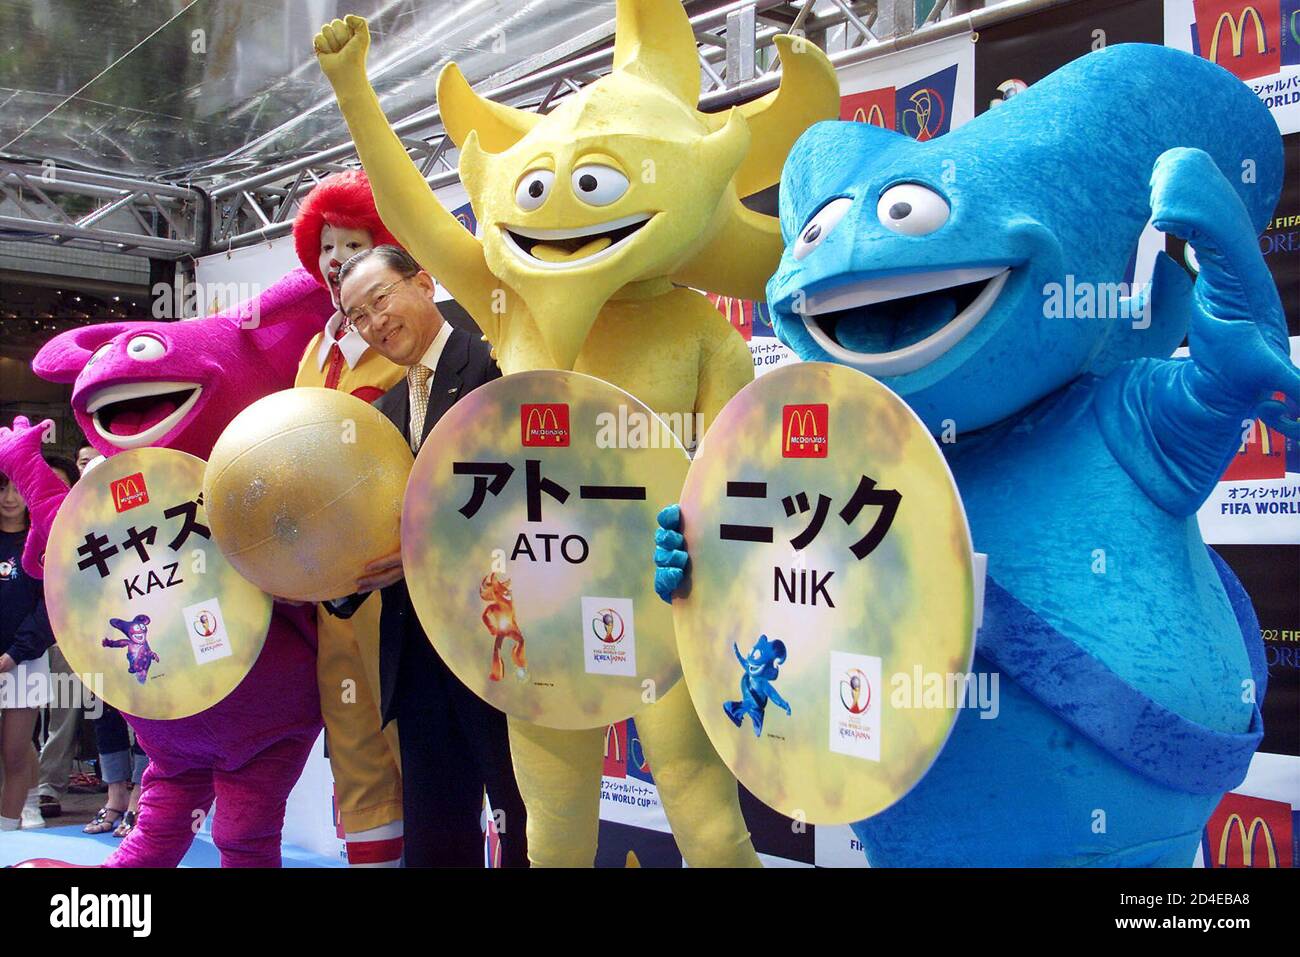 The 02 Fifa World Cup Korea Japan Official Mascots Wave With The Japan Organising Committee General Secretary Yasuhiko Endoh As Their Names Are Announced L R Kaz Ato And Nik In Tokyo April 26